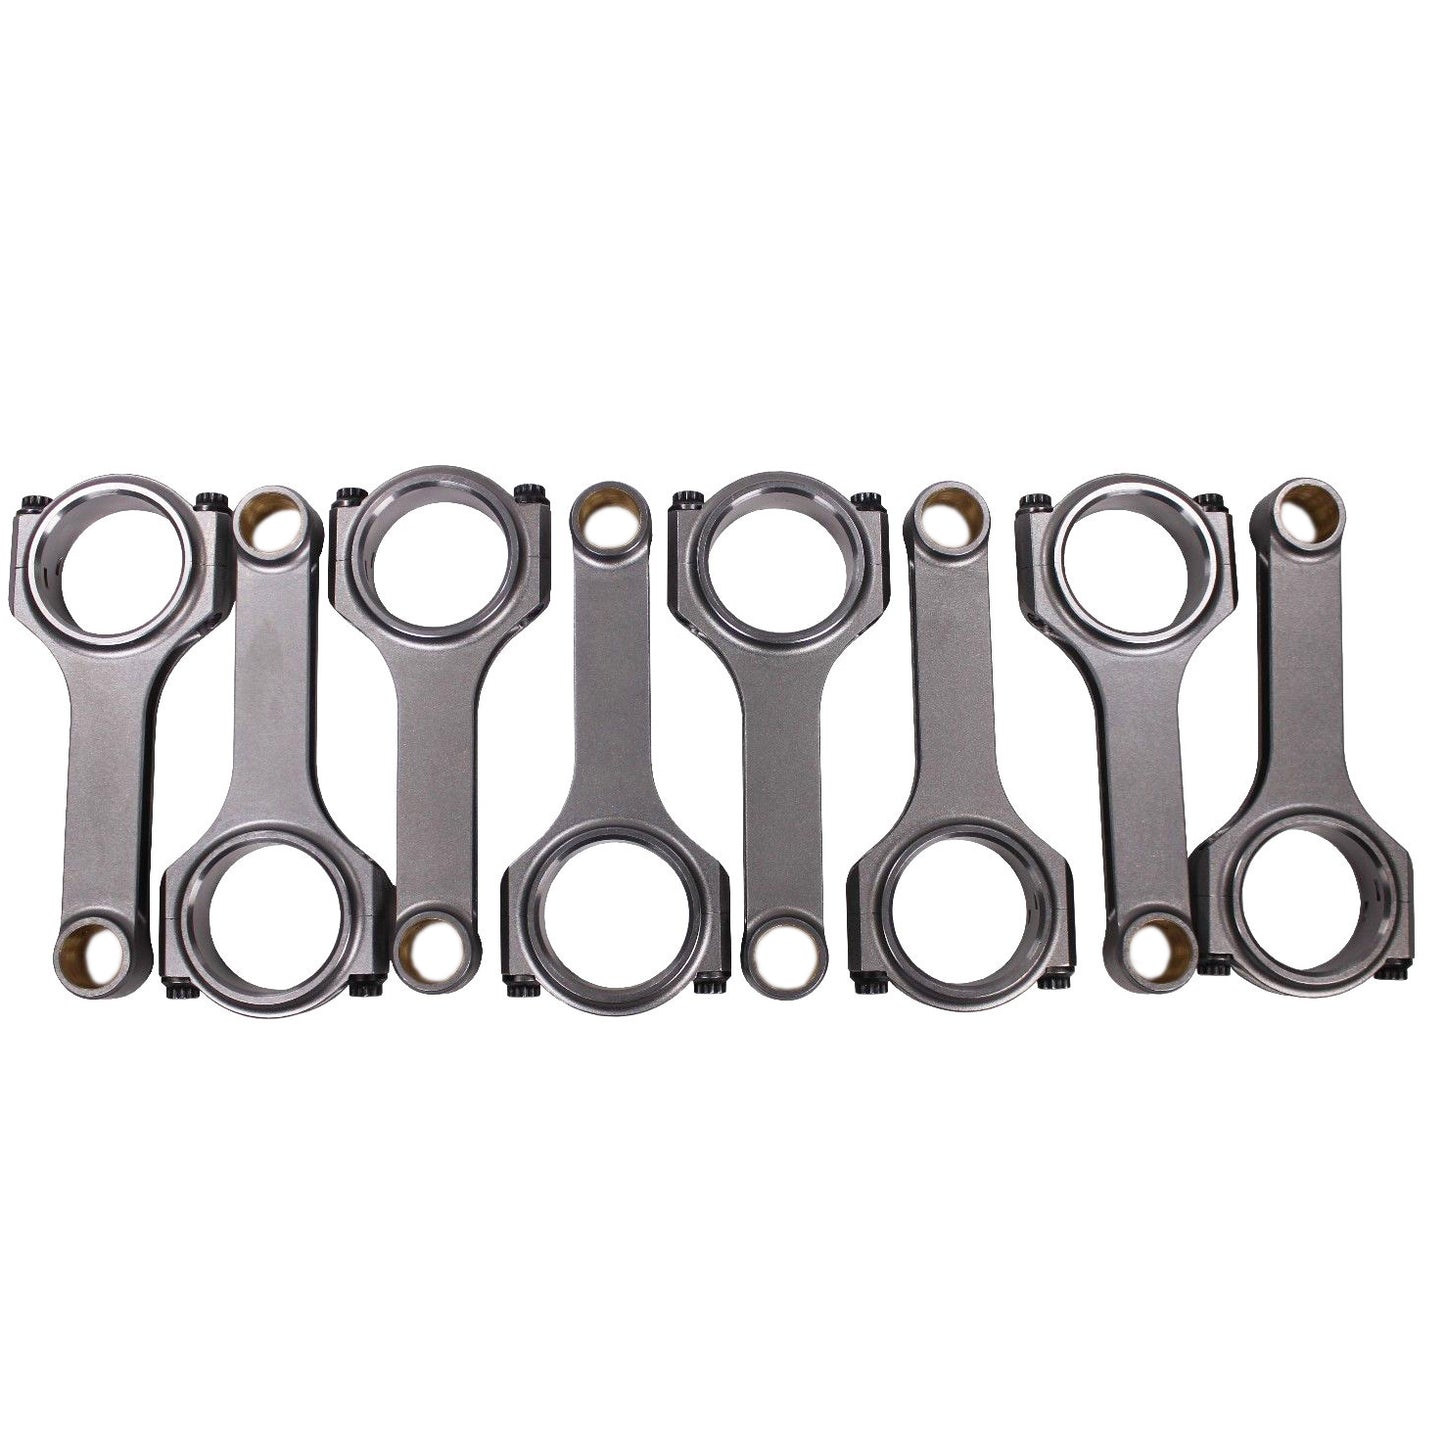 DEMOTOR Set of 8 H-Beam Connecting Rods 6.385" Bushed 4340 Steel for Chevy BBC 454